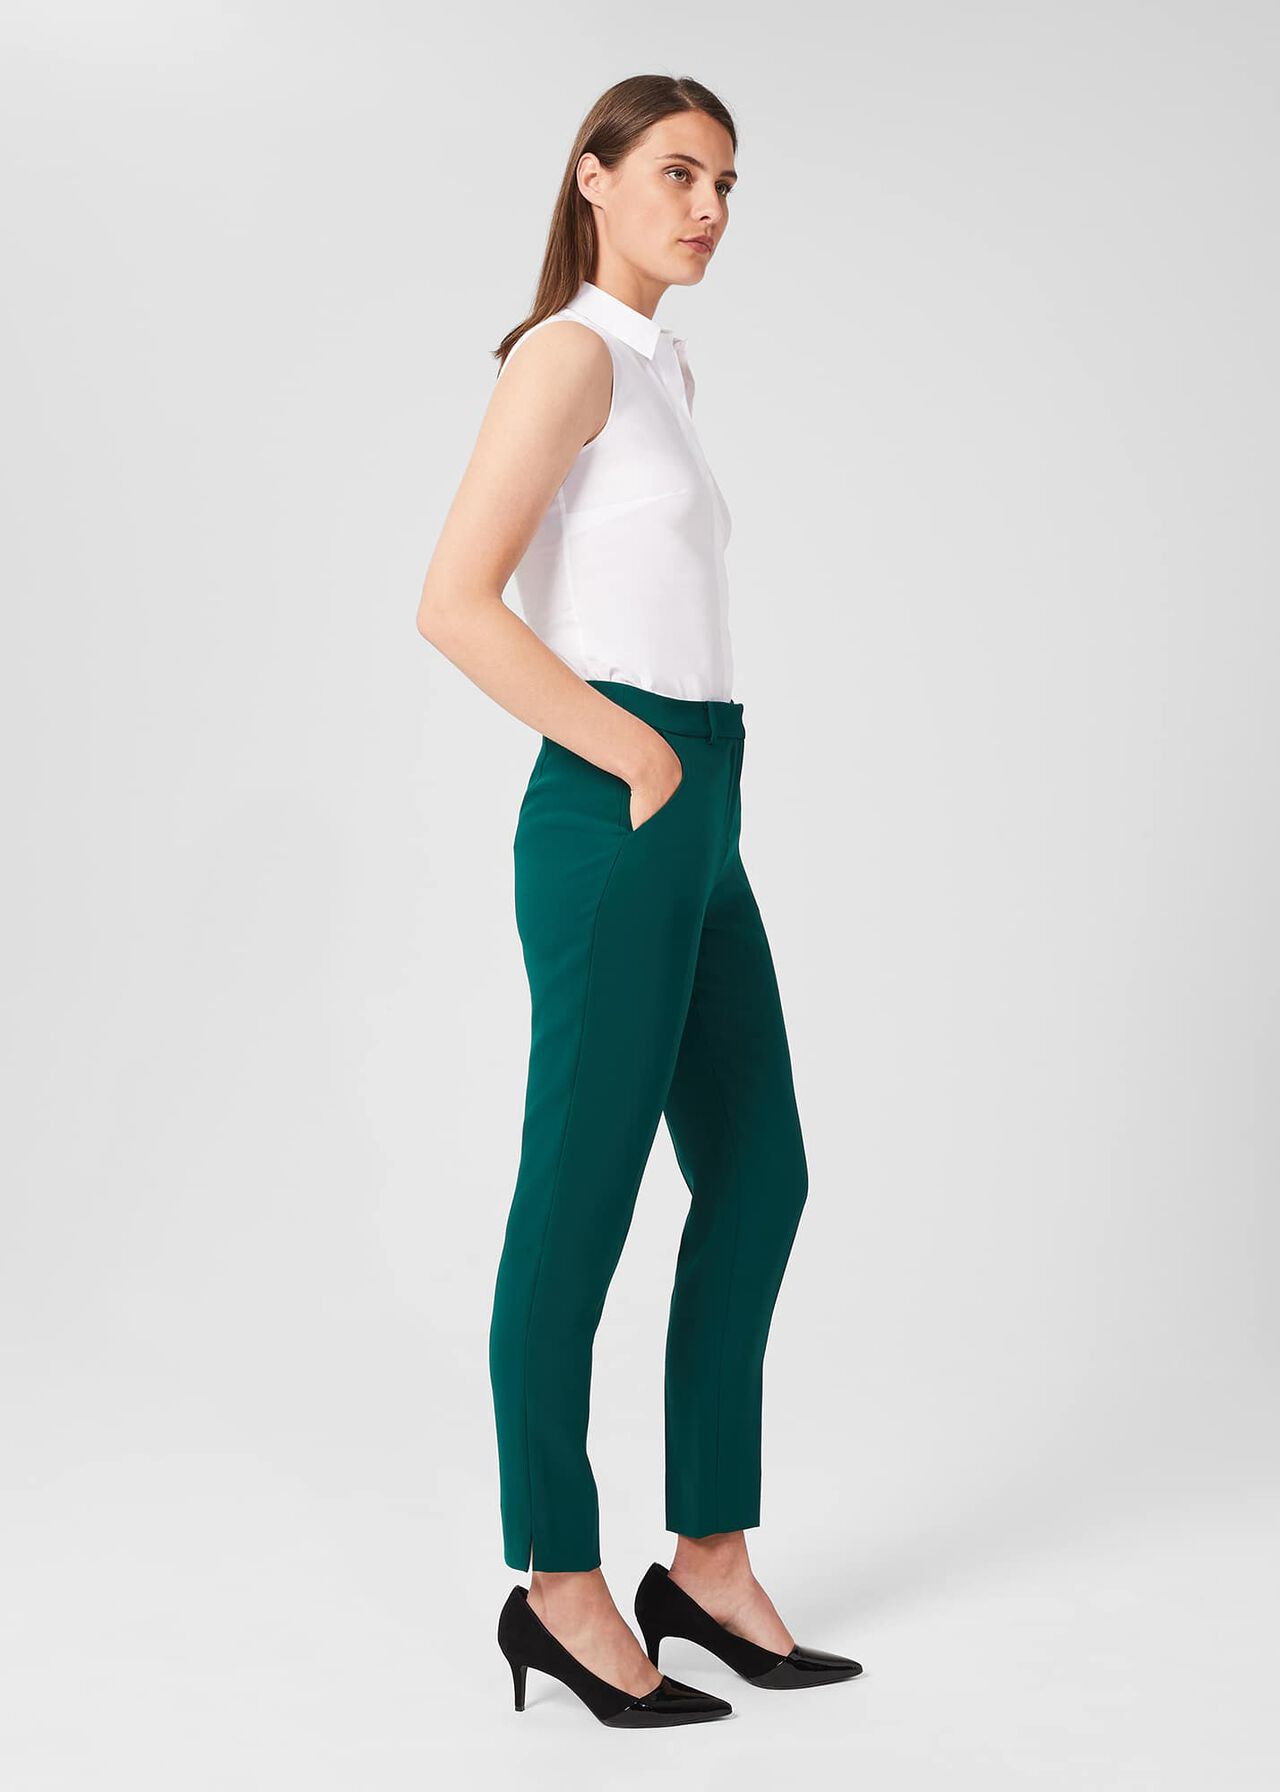 Adelia Tapered Trousers, Leaf Green, hi-res